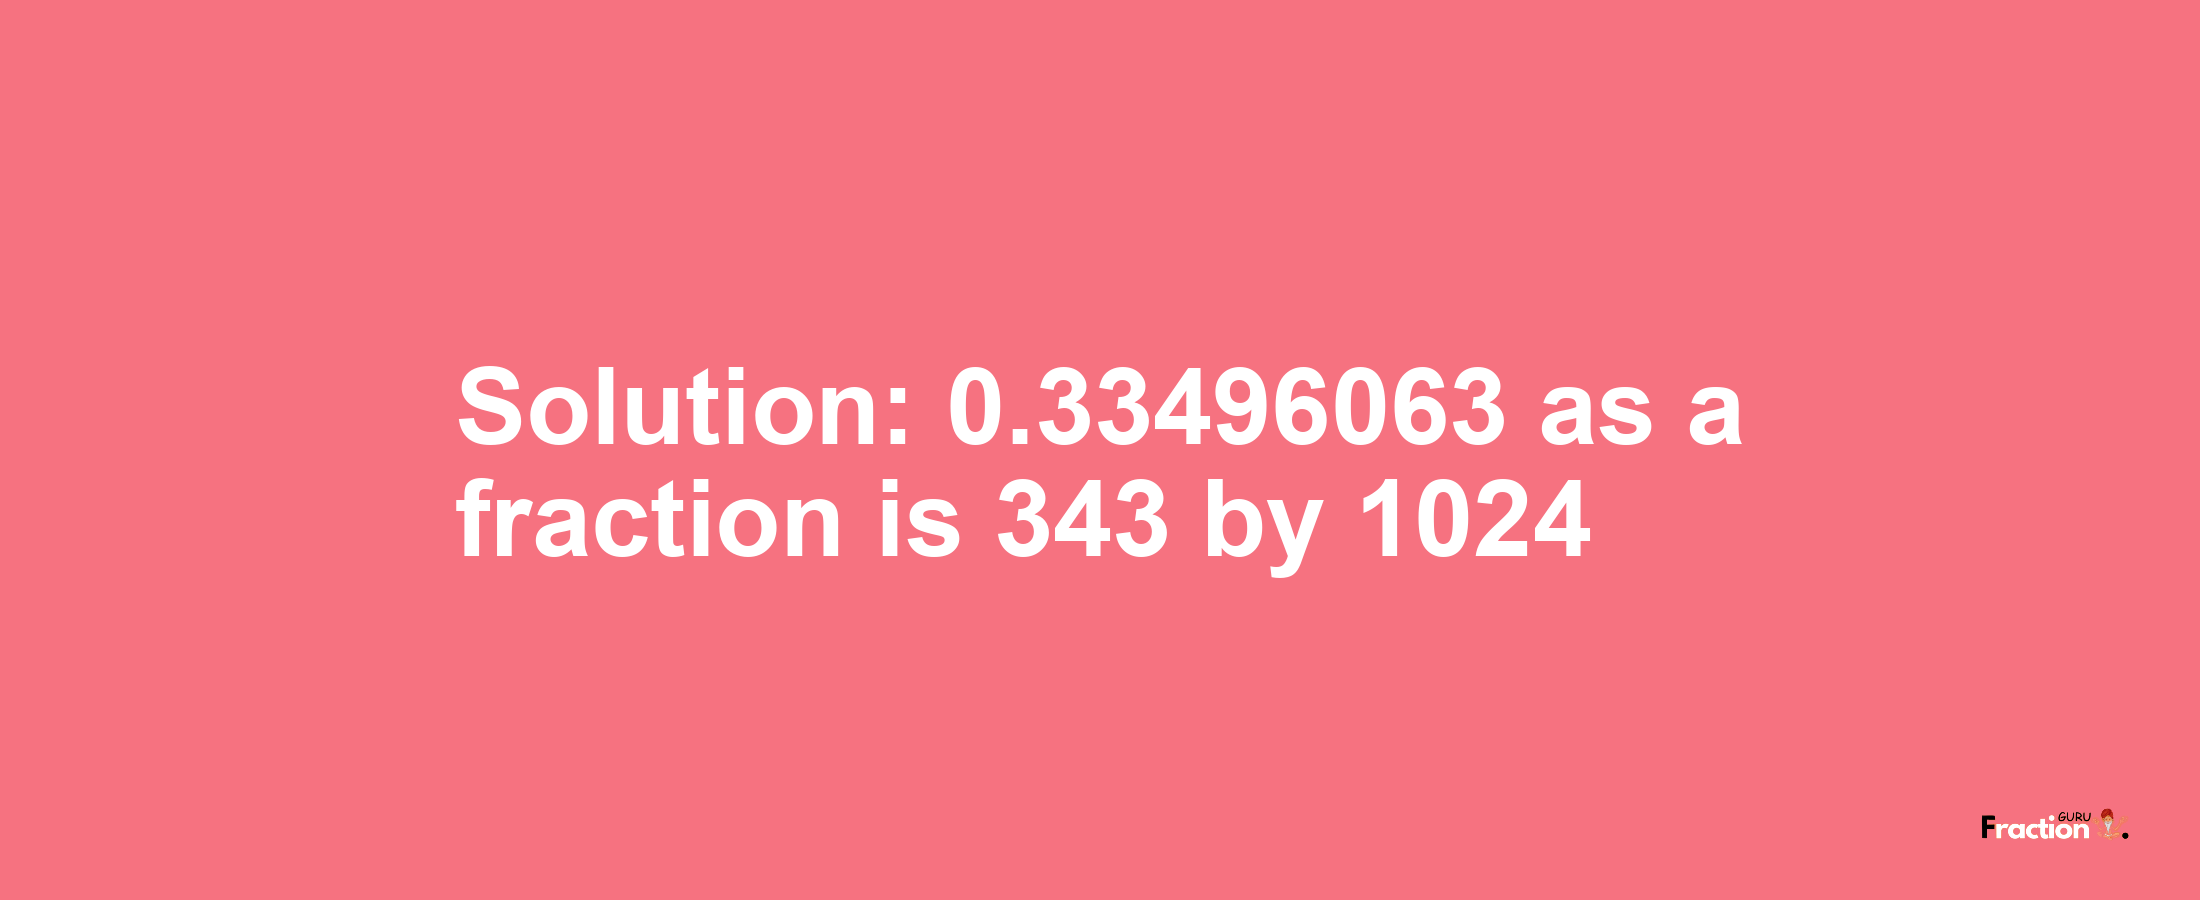 Solution:0.33496063 as a fraction is 343/1024